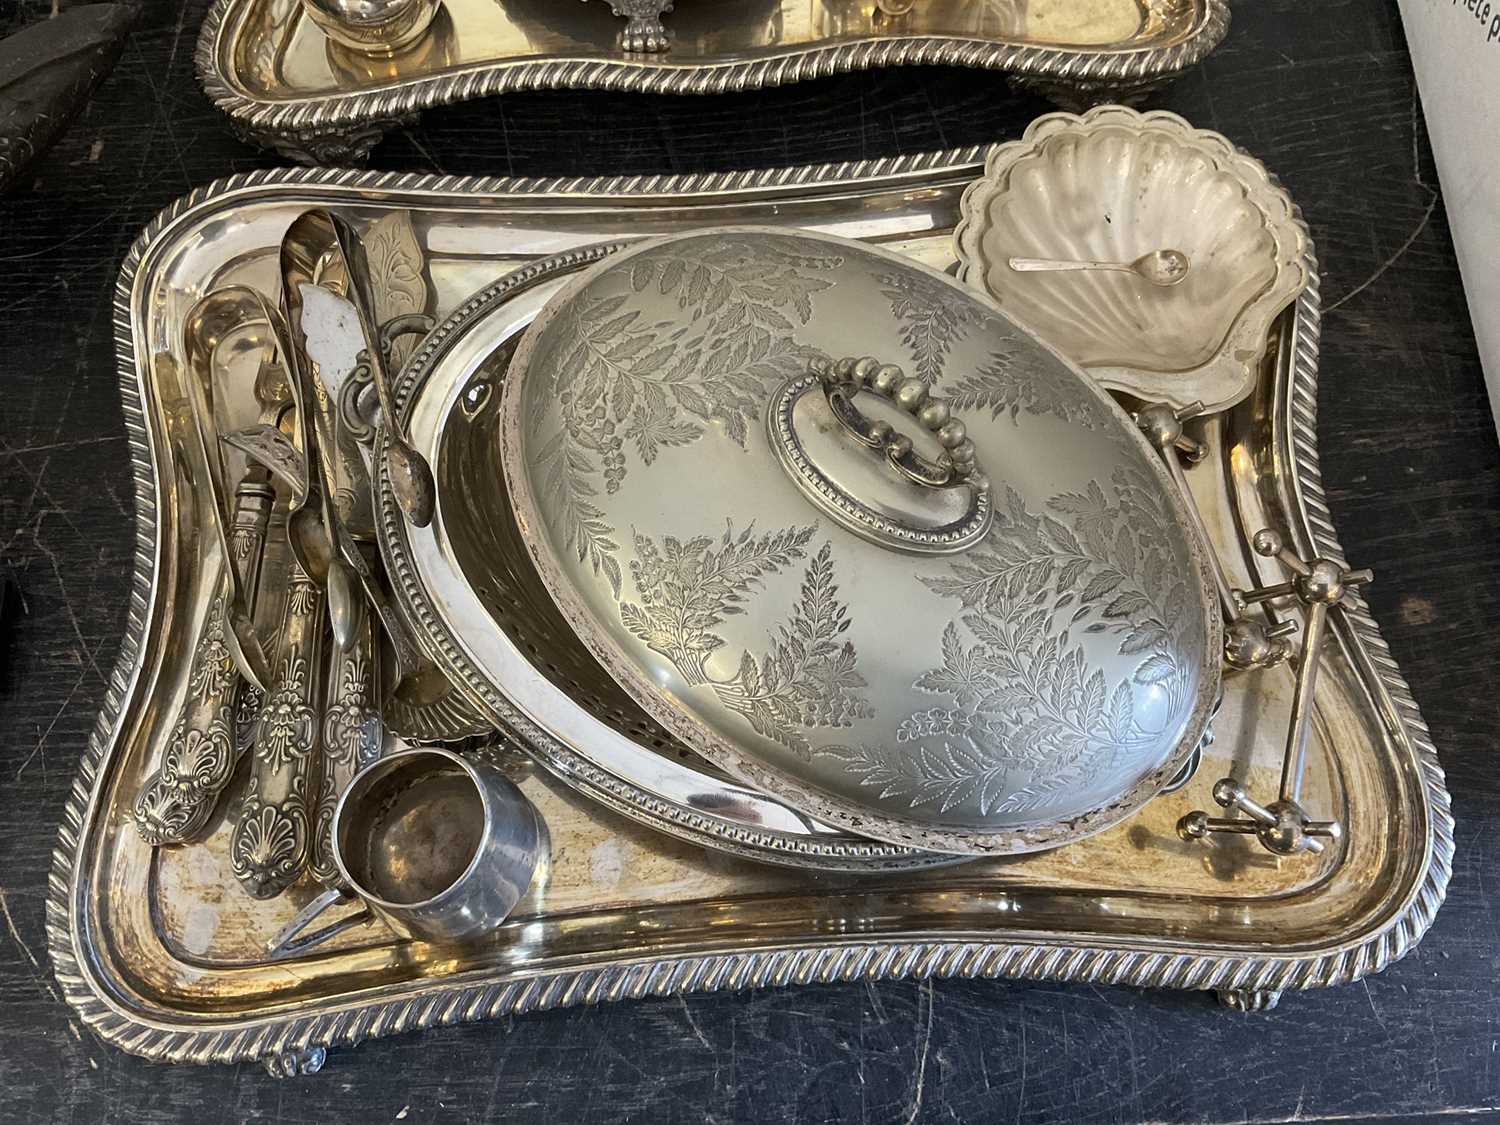 Lot 170 - Silver plated desk stand, a pair of 19th century shaped plated trays and other silver plate